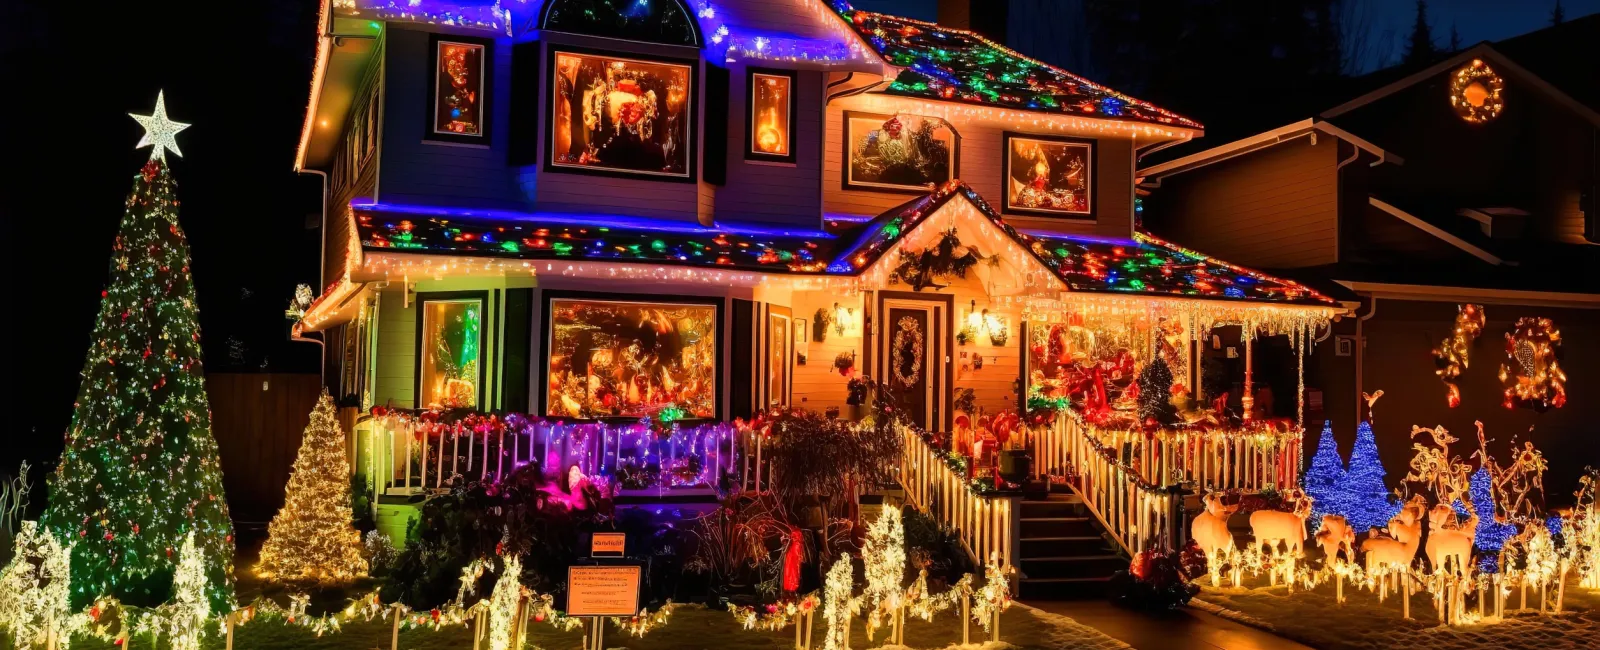 The Joy of Christmas Lights: A Safe and Illuminating Guide